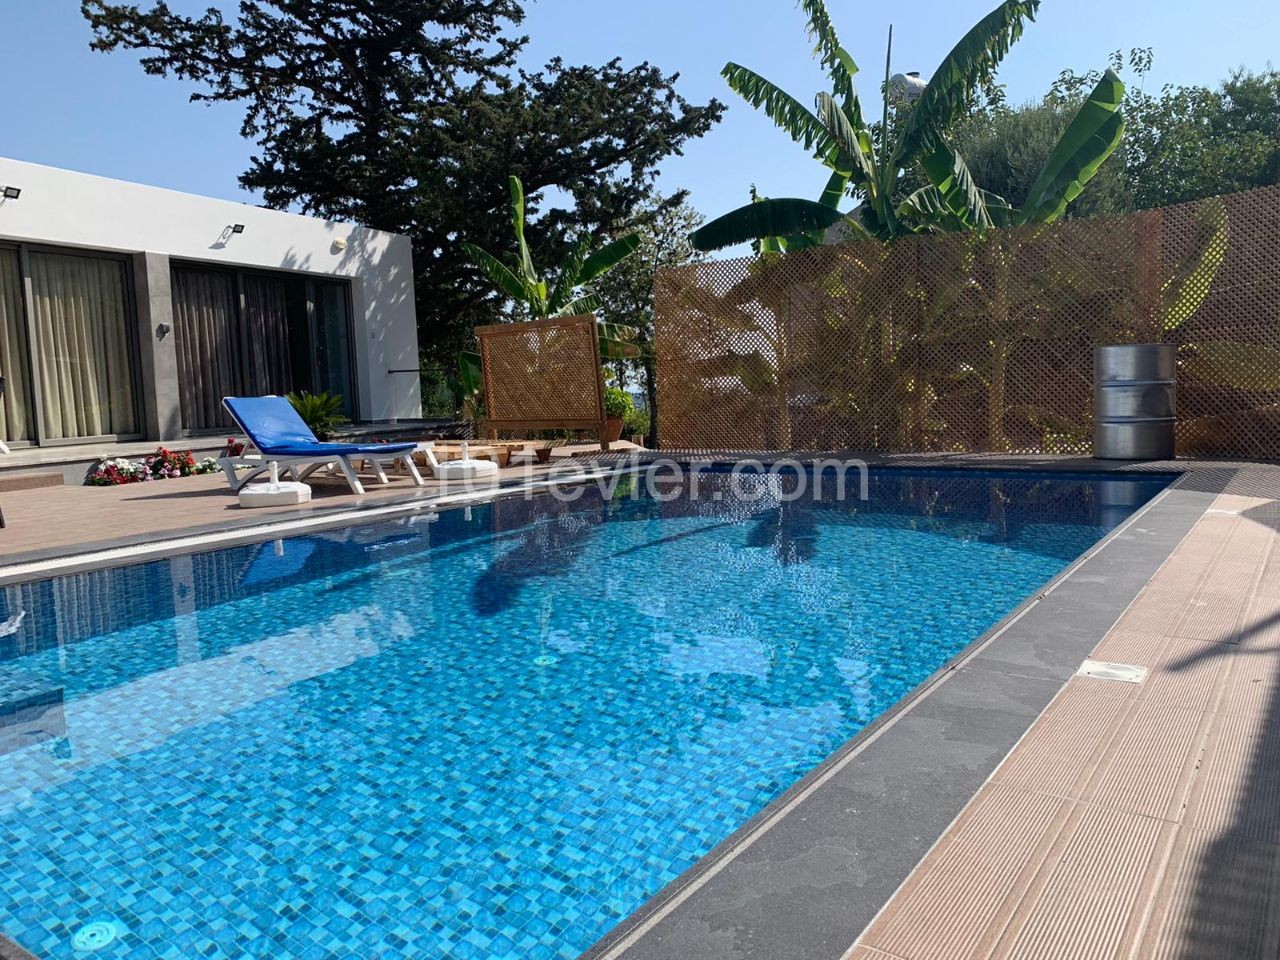 4+2 Villa with Private Pool for Daily Rent from the Owner ** 